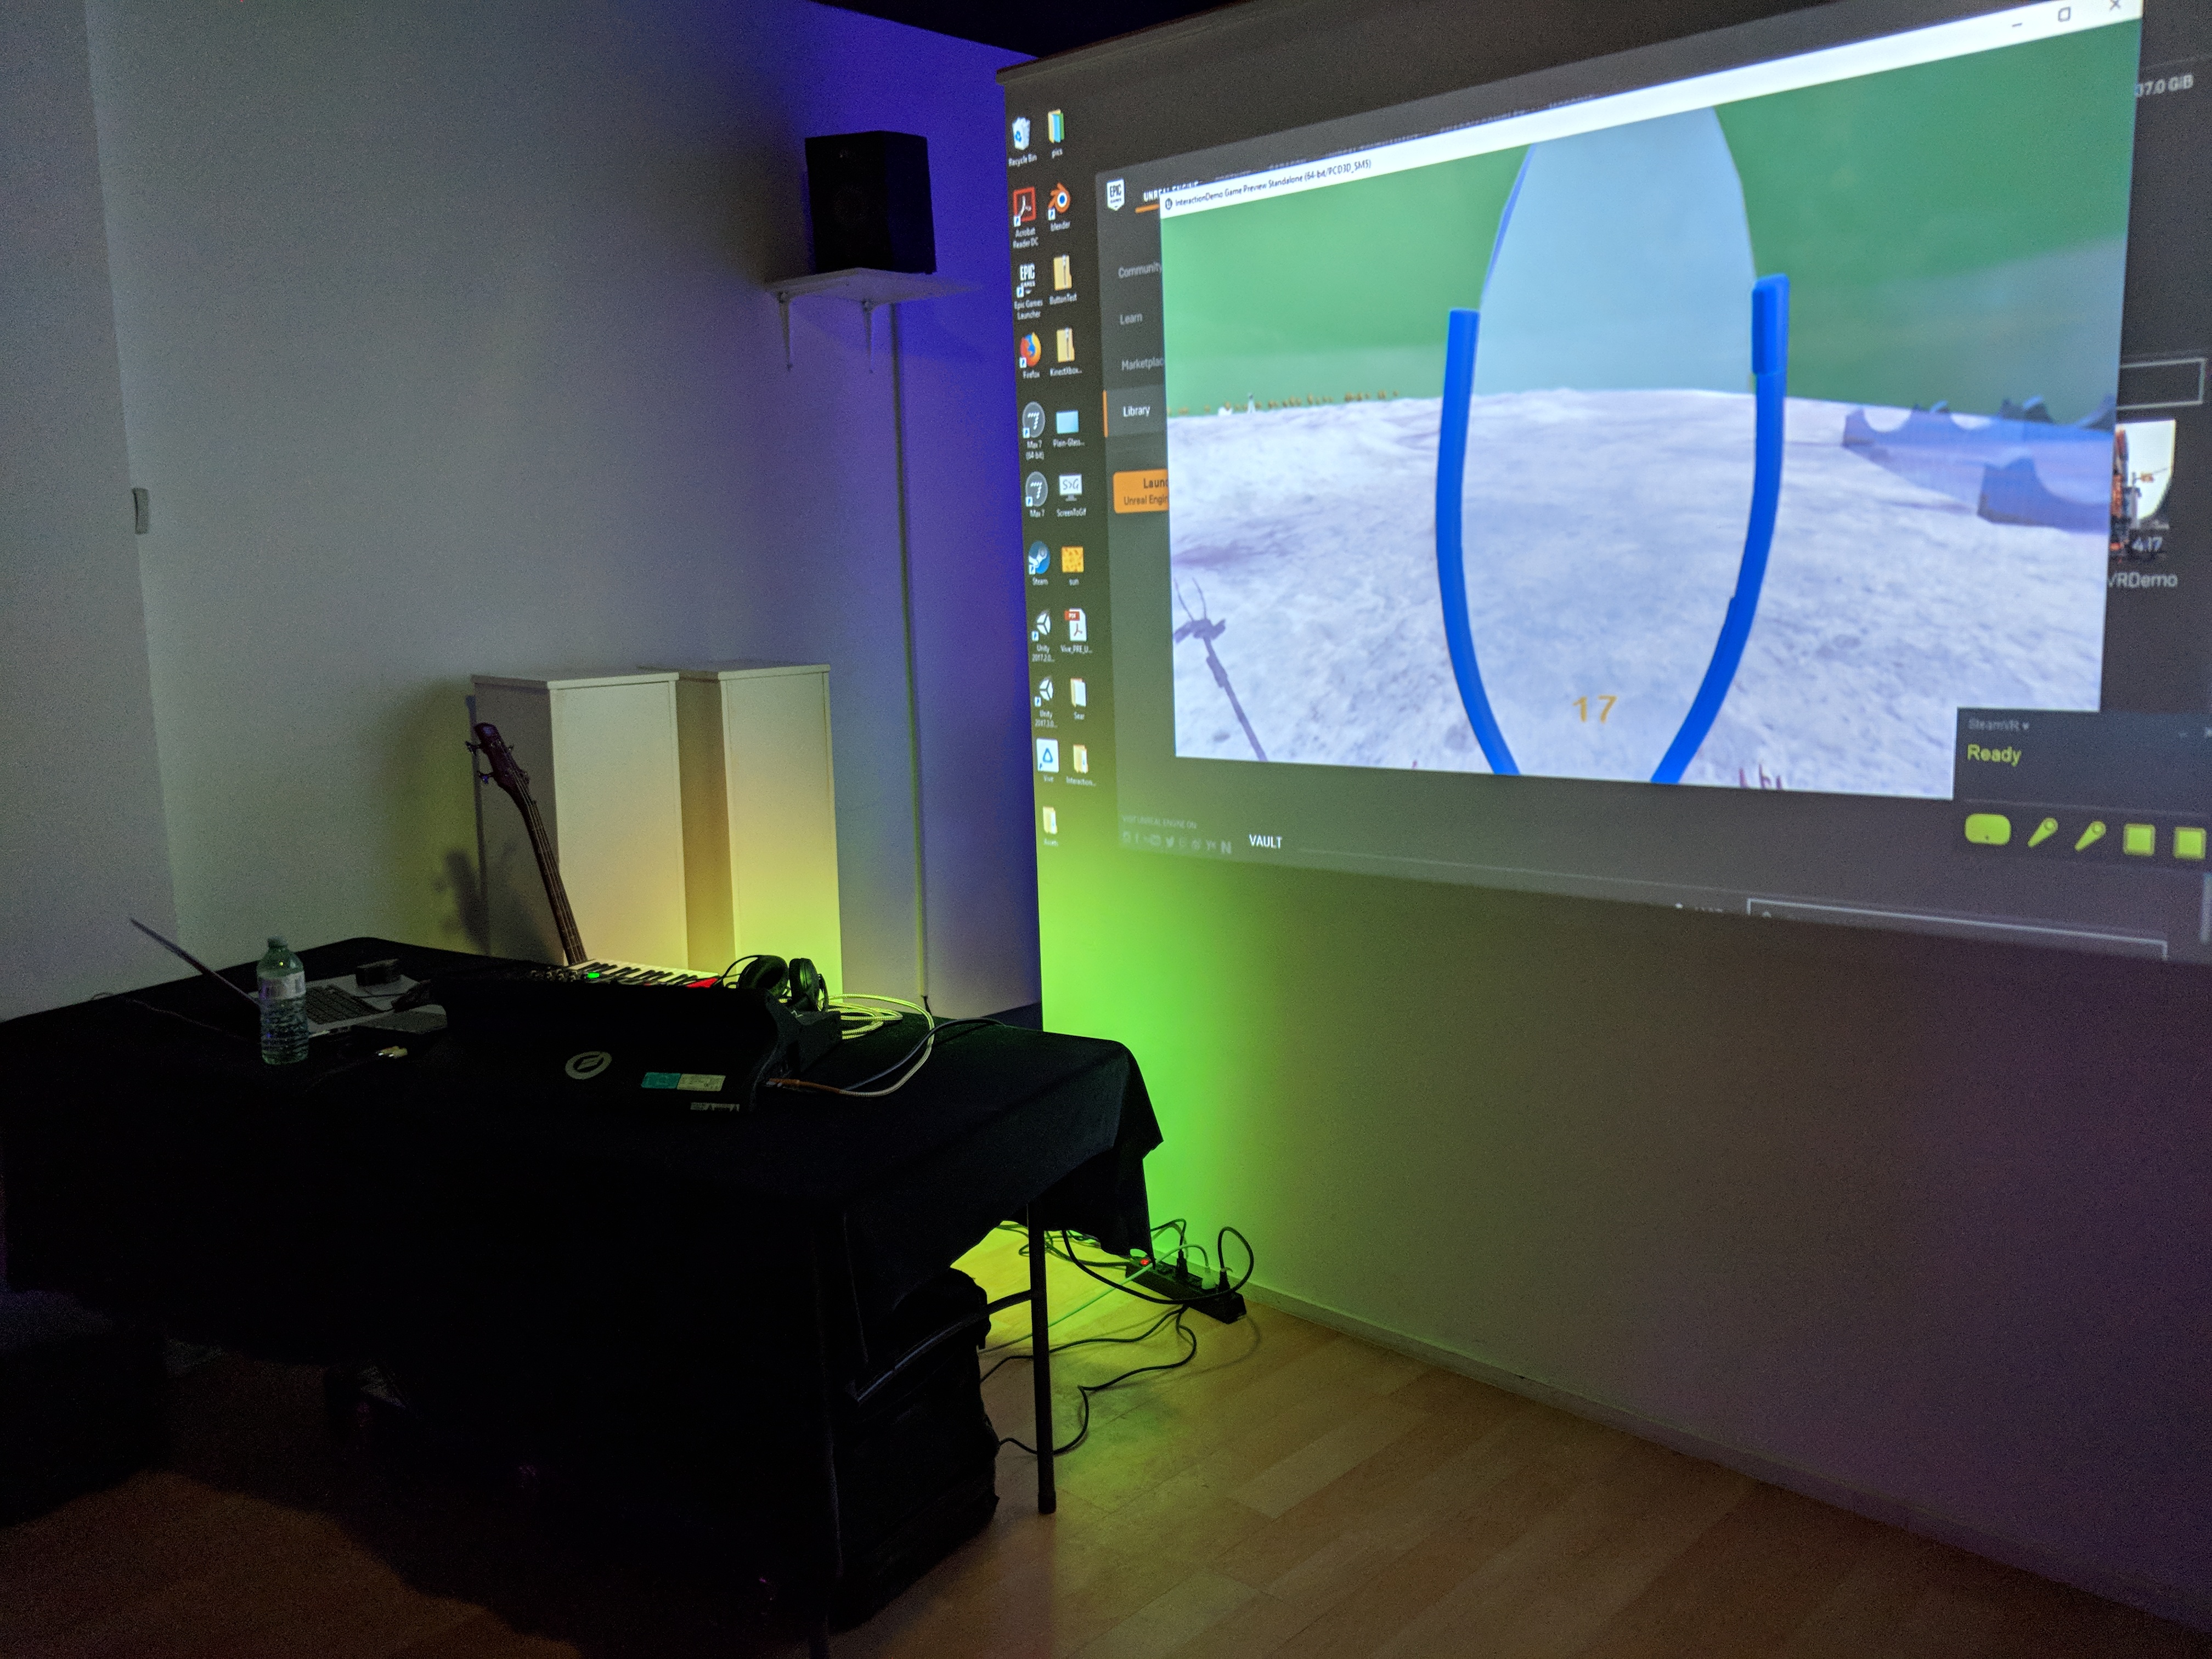 Electric Perfume Performance setup and Lucid on screen